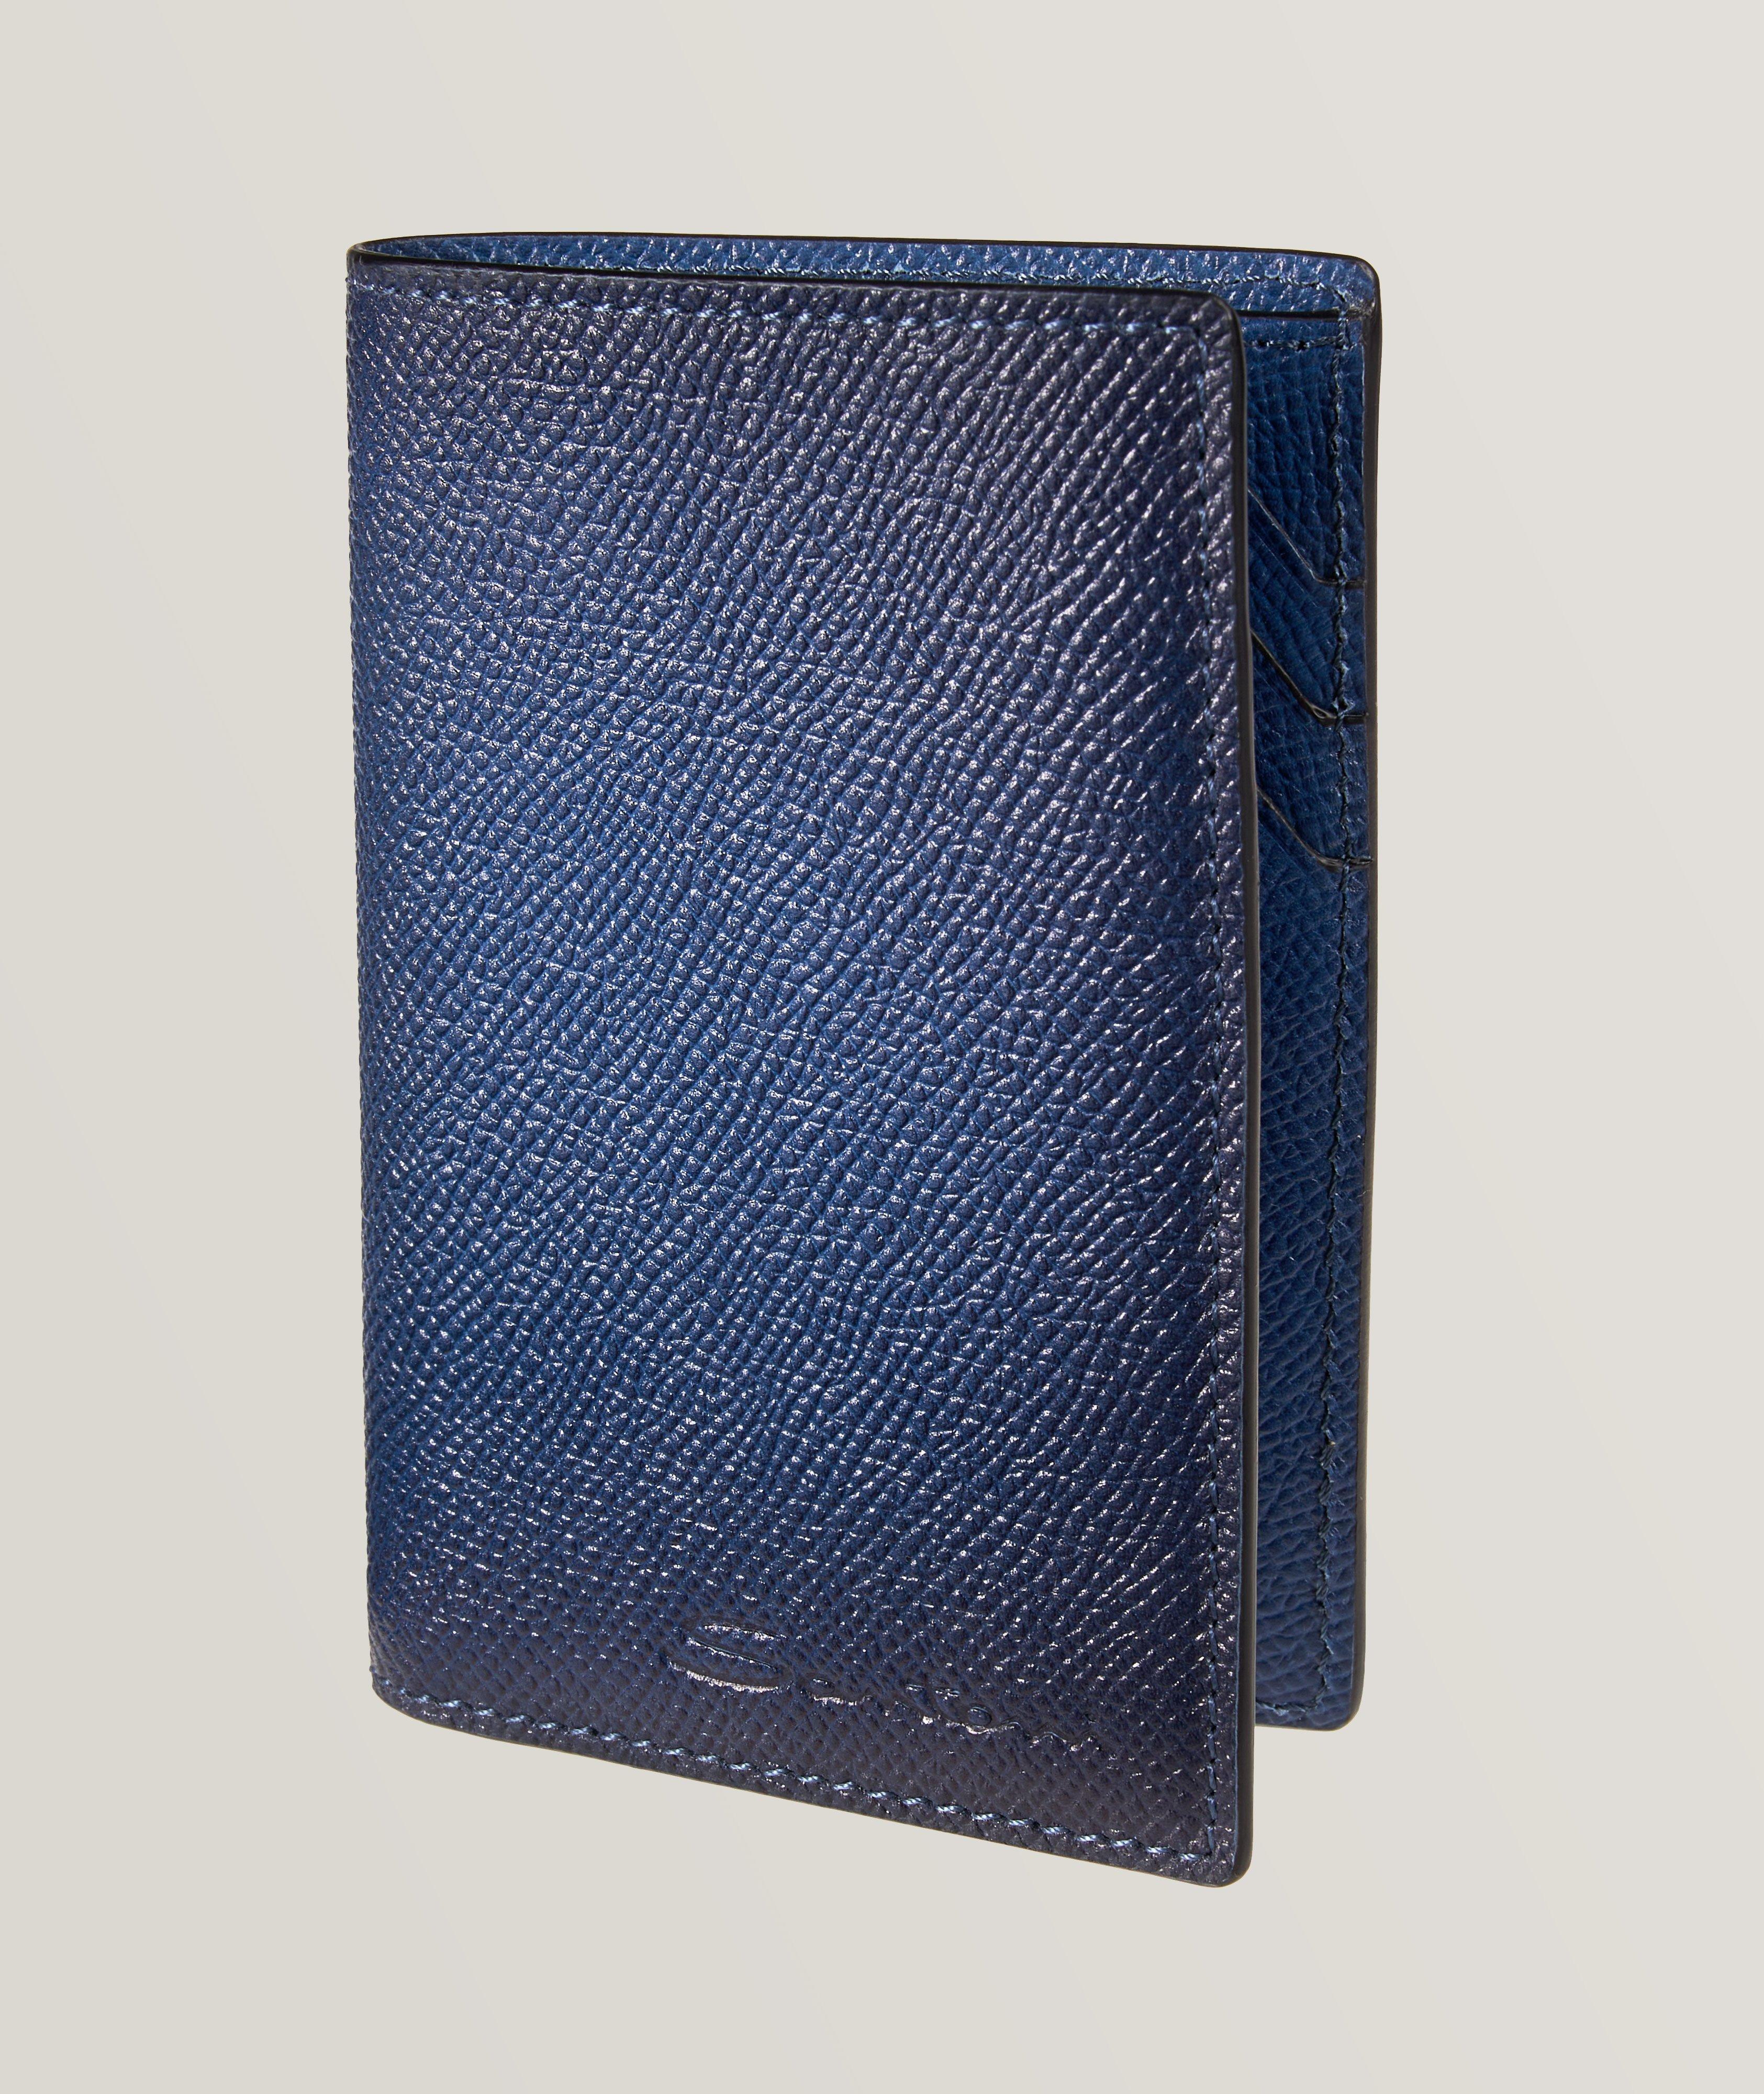 Air Burnished Grain Leather Vertical Card Case image 0